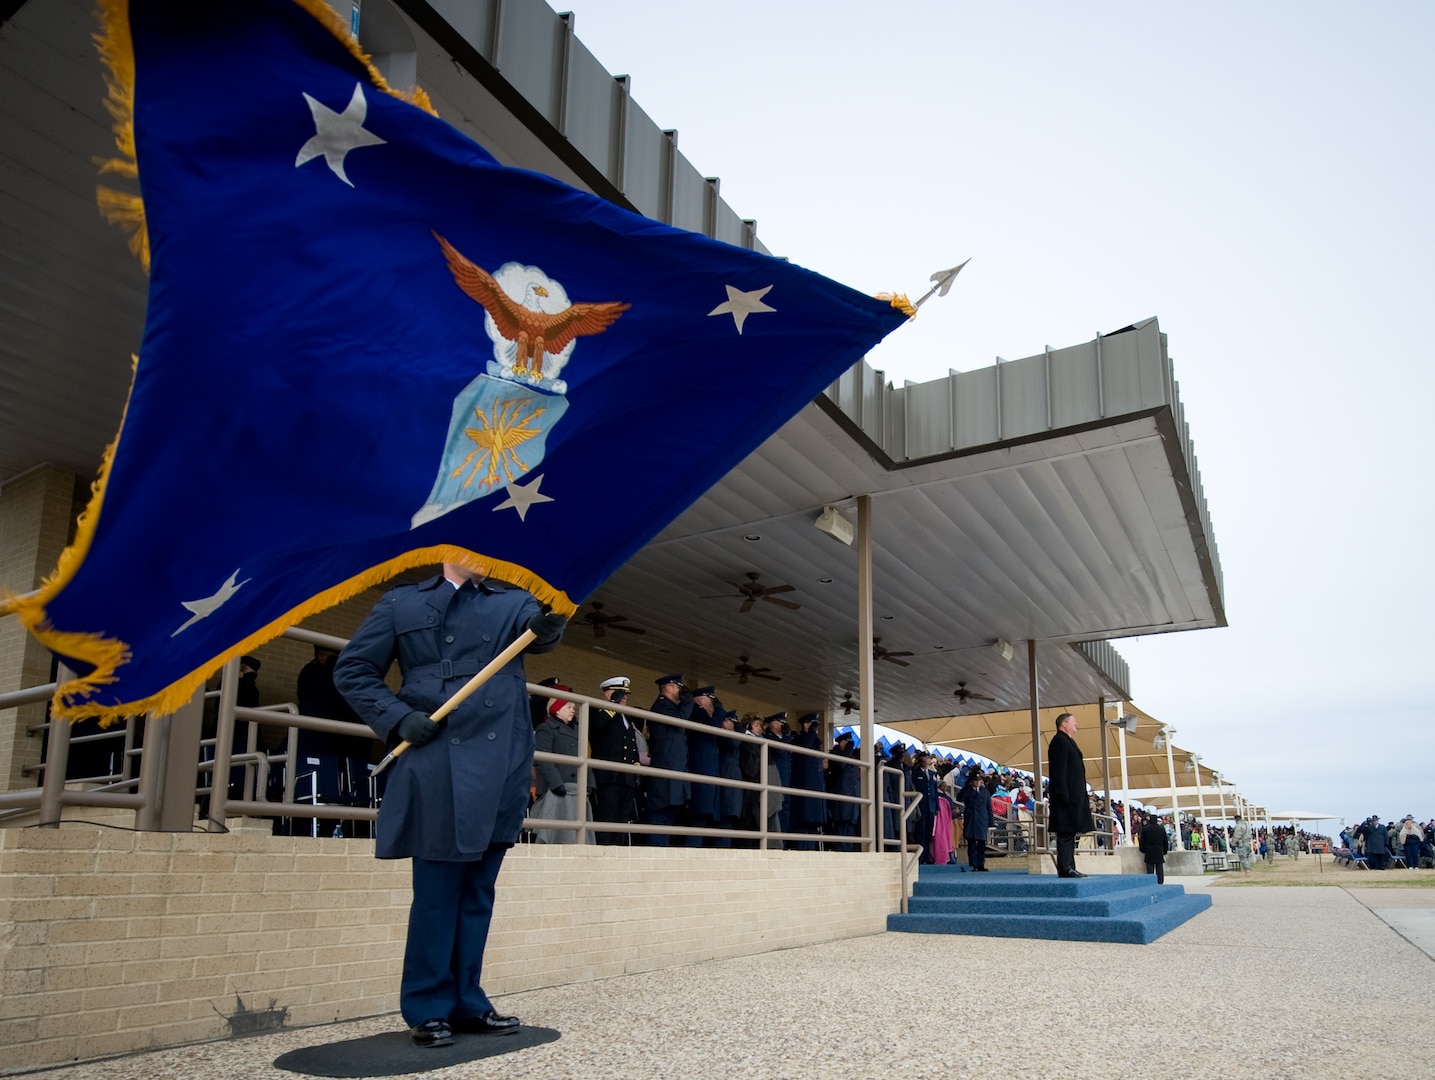 Secretary of the Air Force Michael Donley (top of steps), stands ready for approaching flights to pass in review during a Basic Military Training graduation ceremony Jan. 8, 2010, at Lackland Air Force Base, Texas.  (U.S. Air Force photo/Lance Cheung)